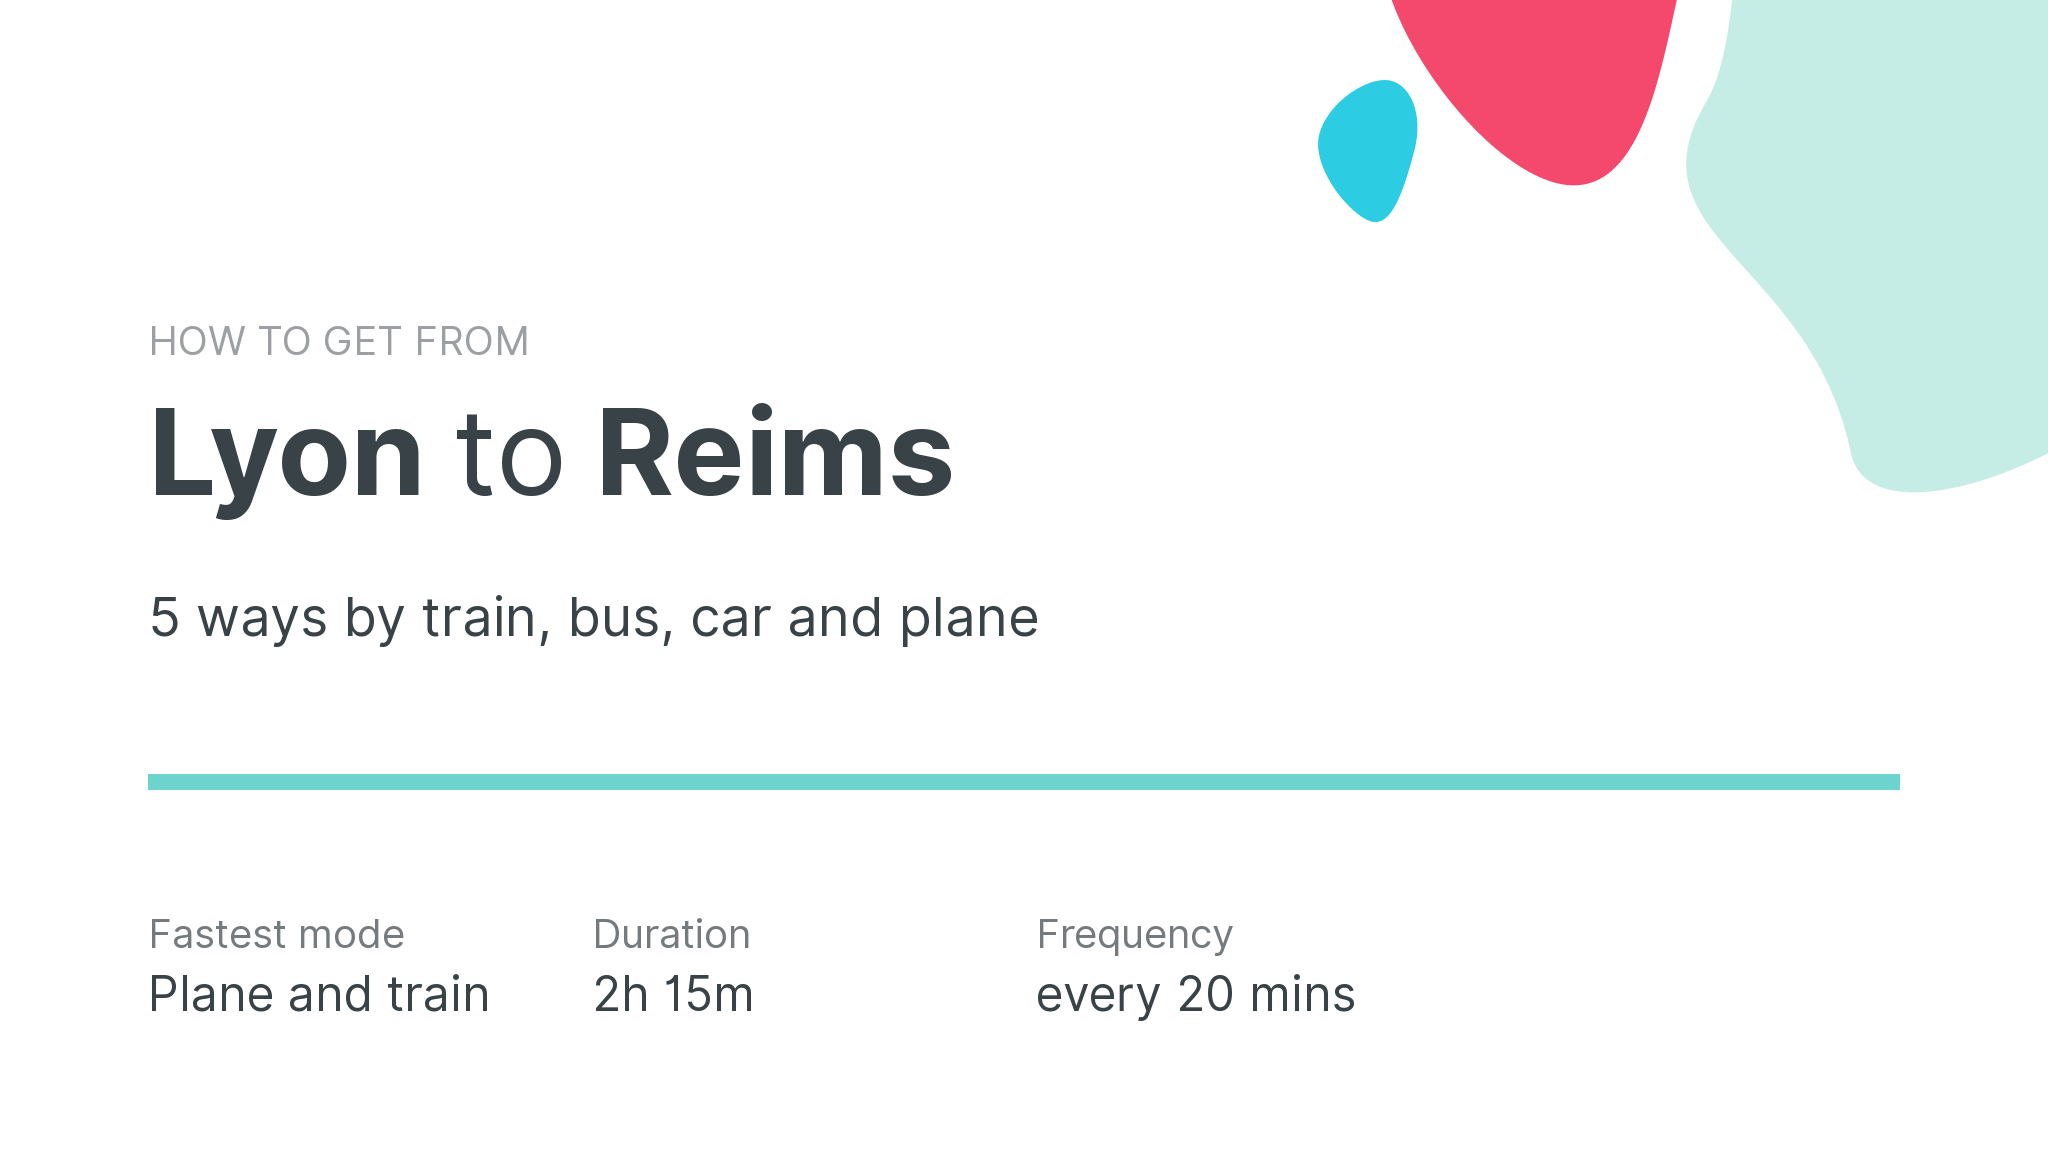 How do I get from Lyon to Reims